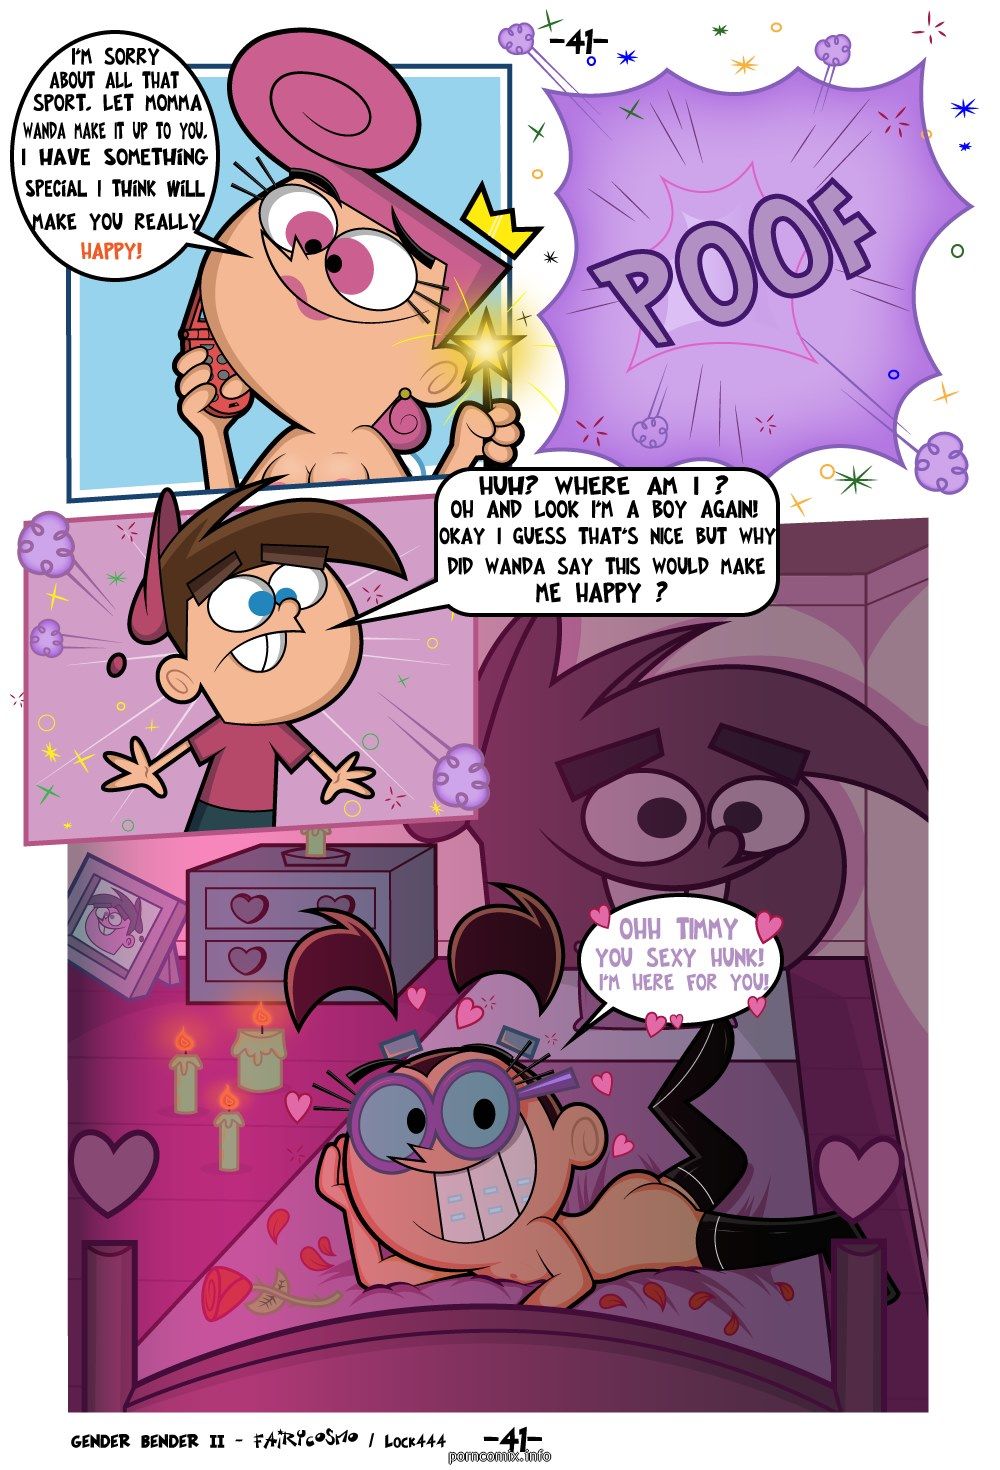 Fairly OddParents Gender Bender II [FairyCosmo] page 42